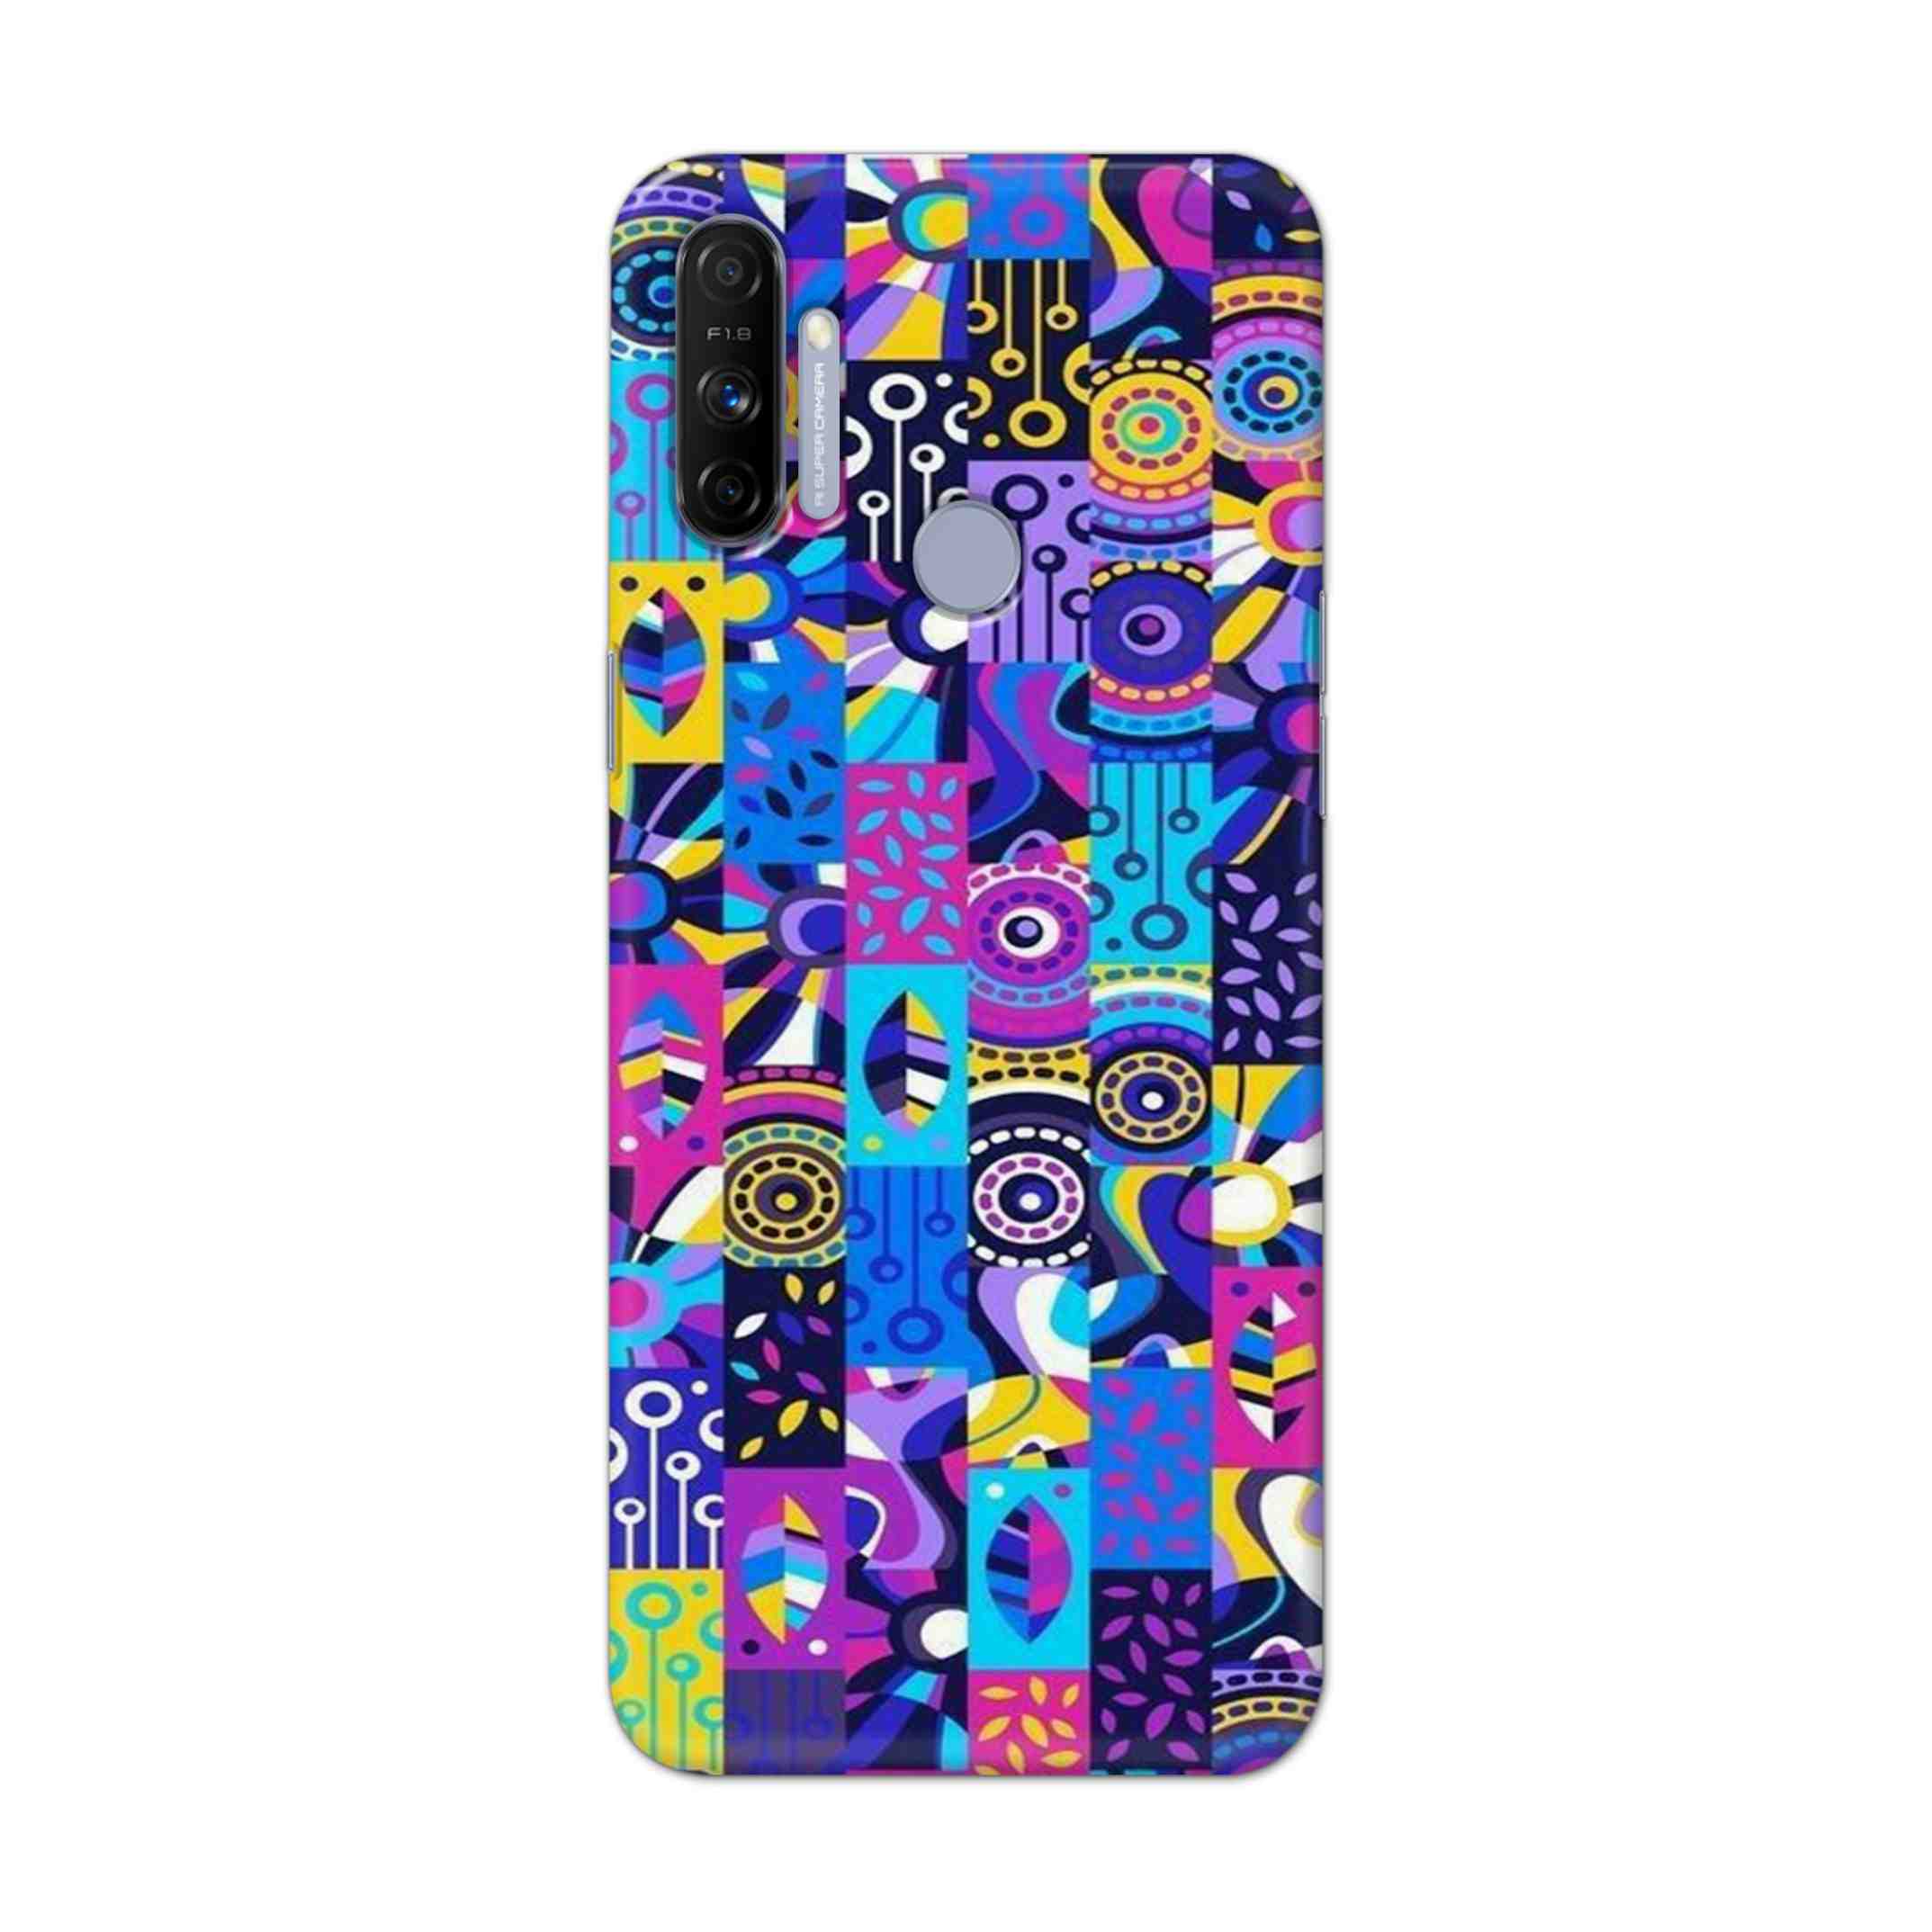 Buy Rainbow Art Hard Back Mobile Phone Case Cover For Realme Narzo 20A Online